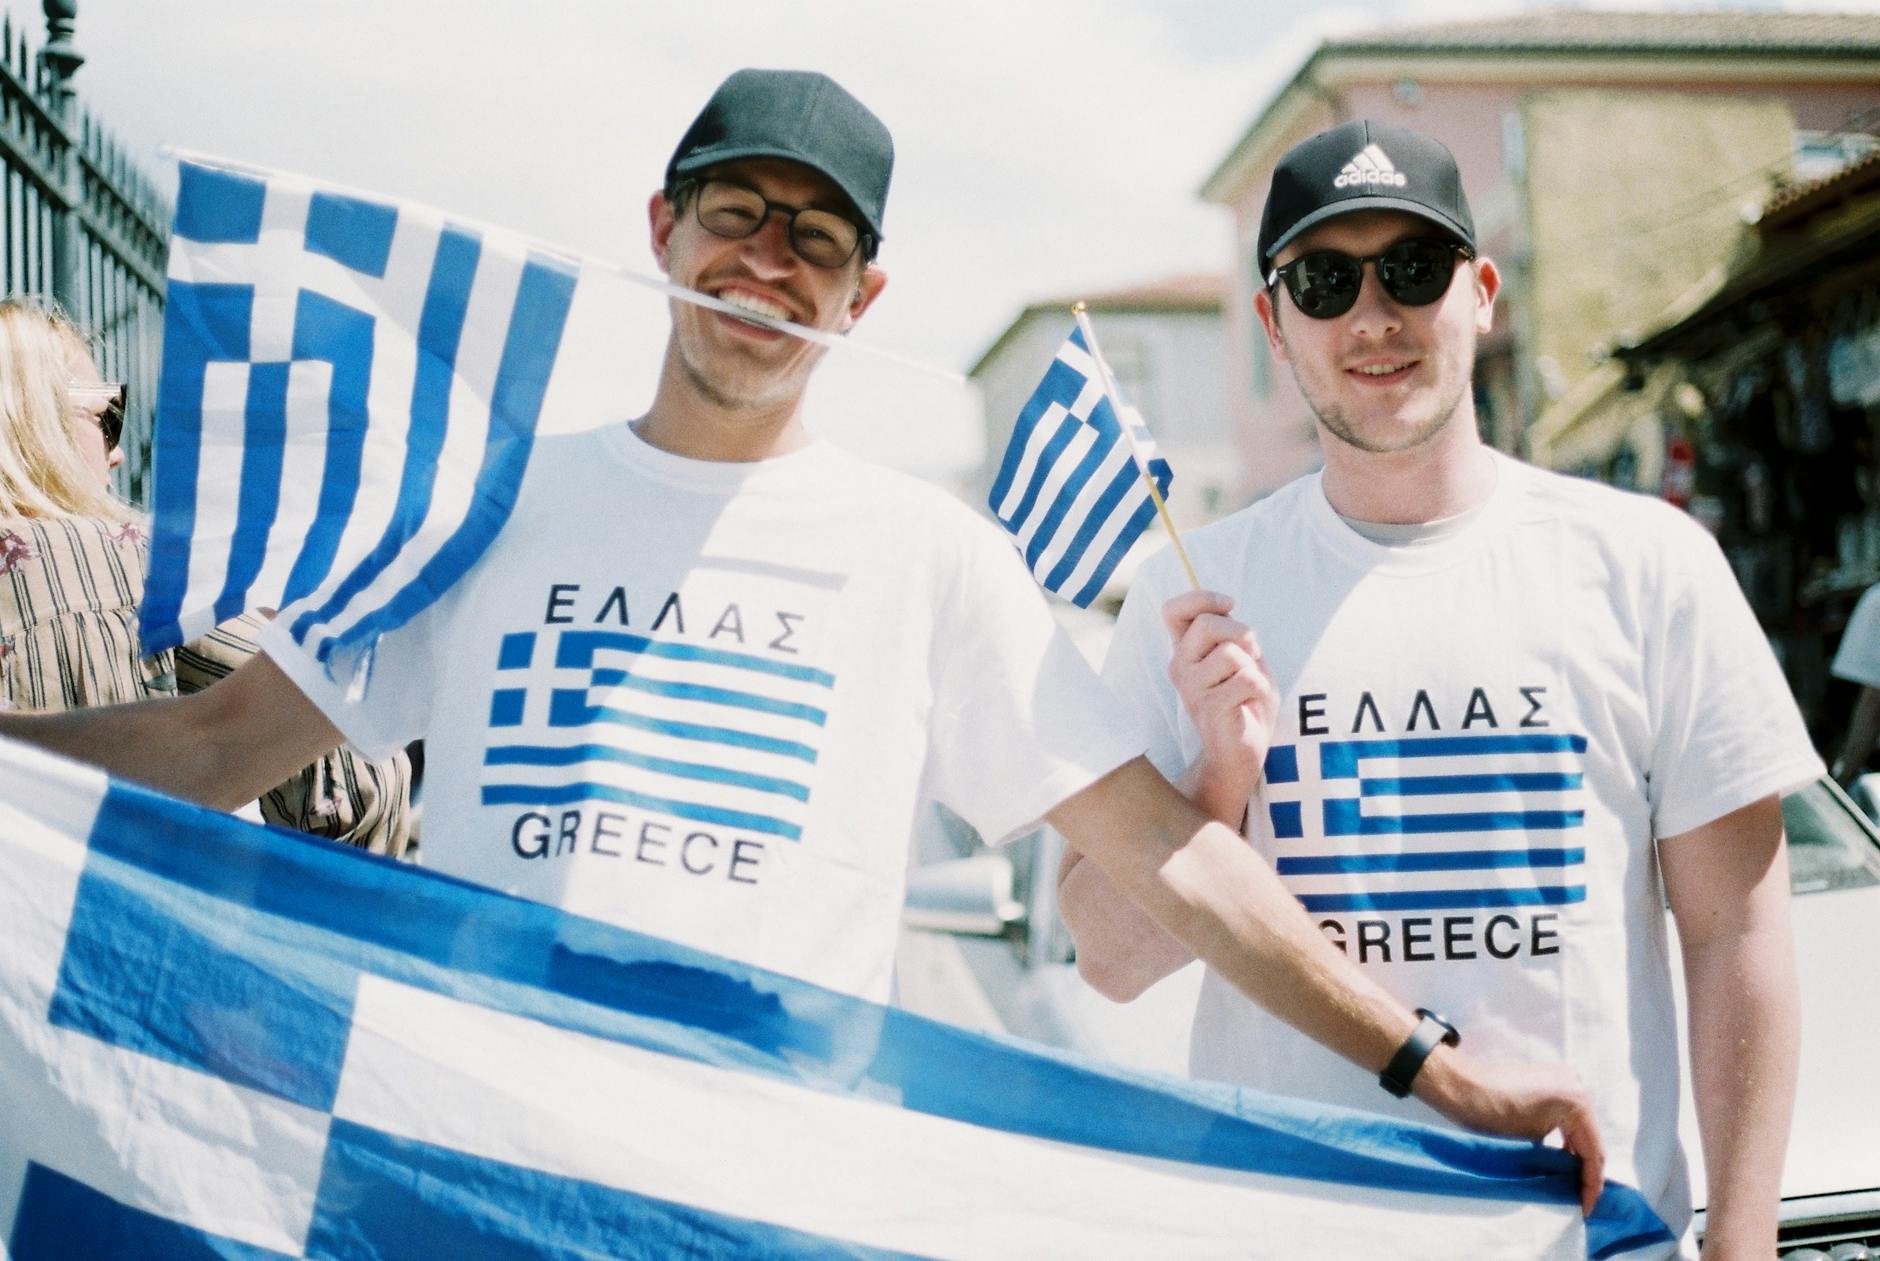 man wearing t shirts and holding flags of greece